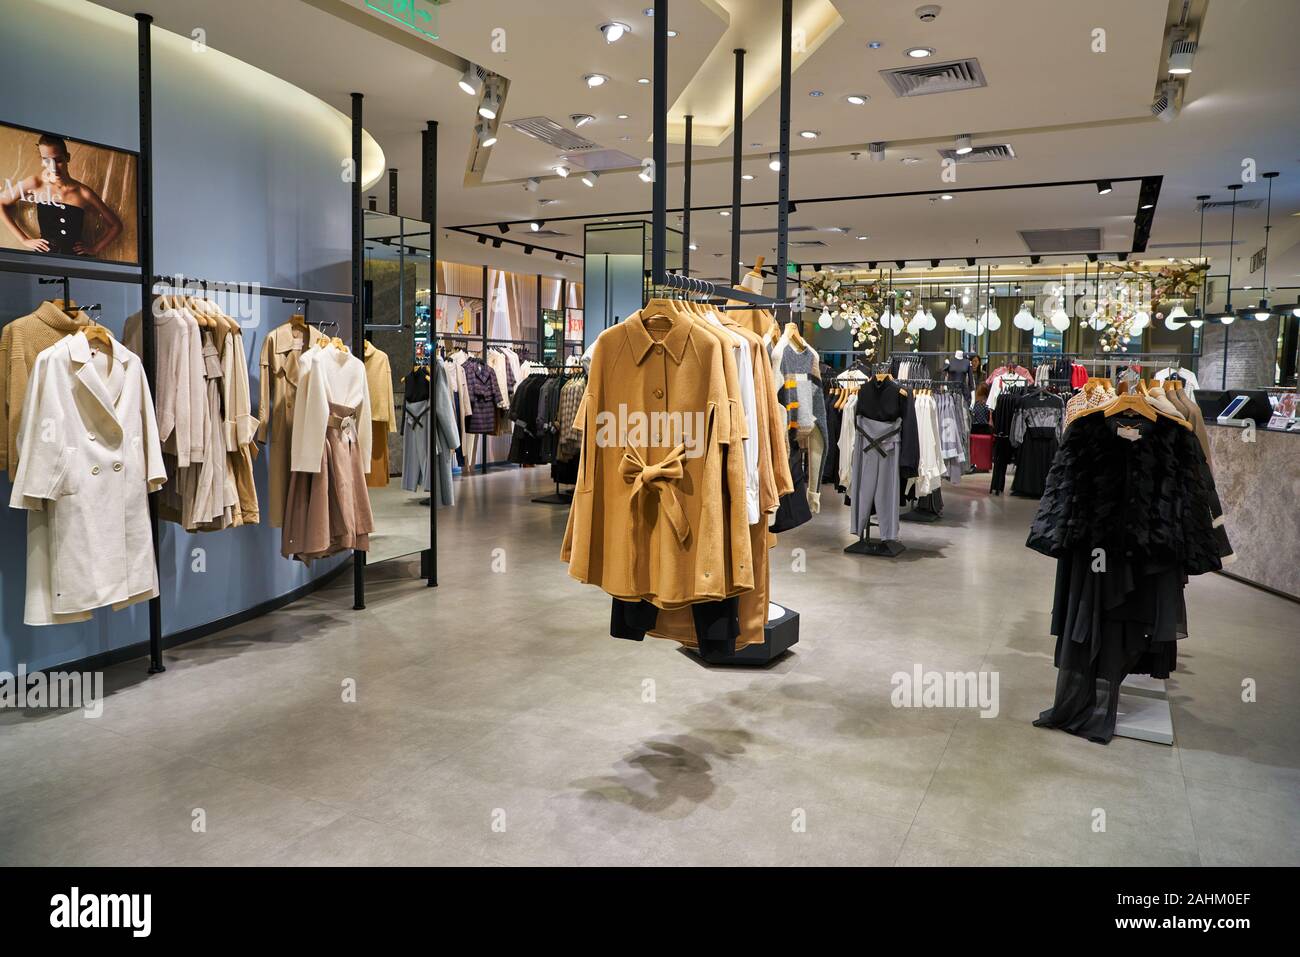 Vero Moda High Resolution Stock Photography and Images - Alamy